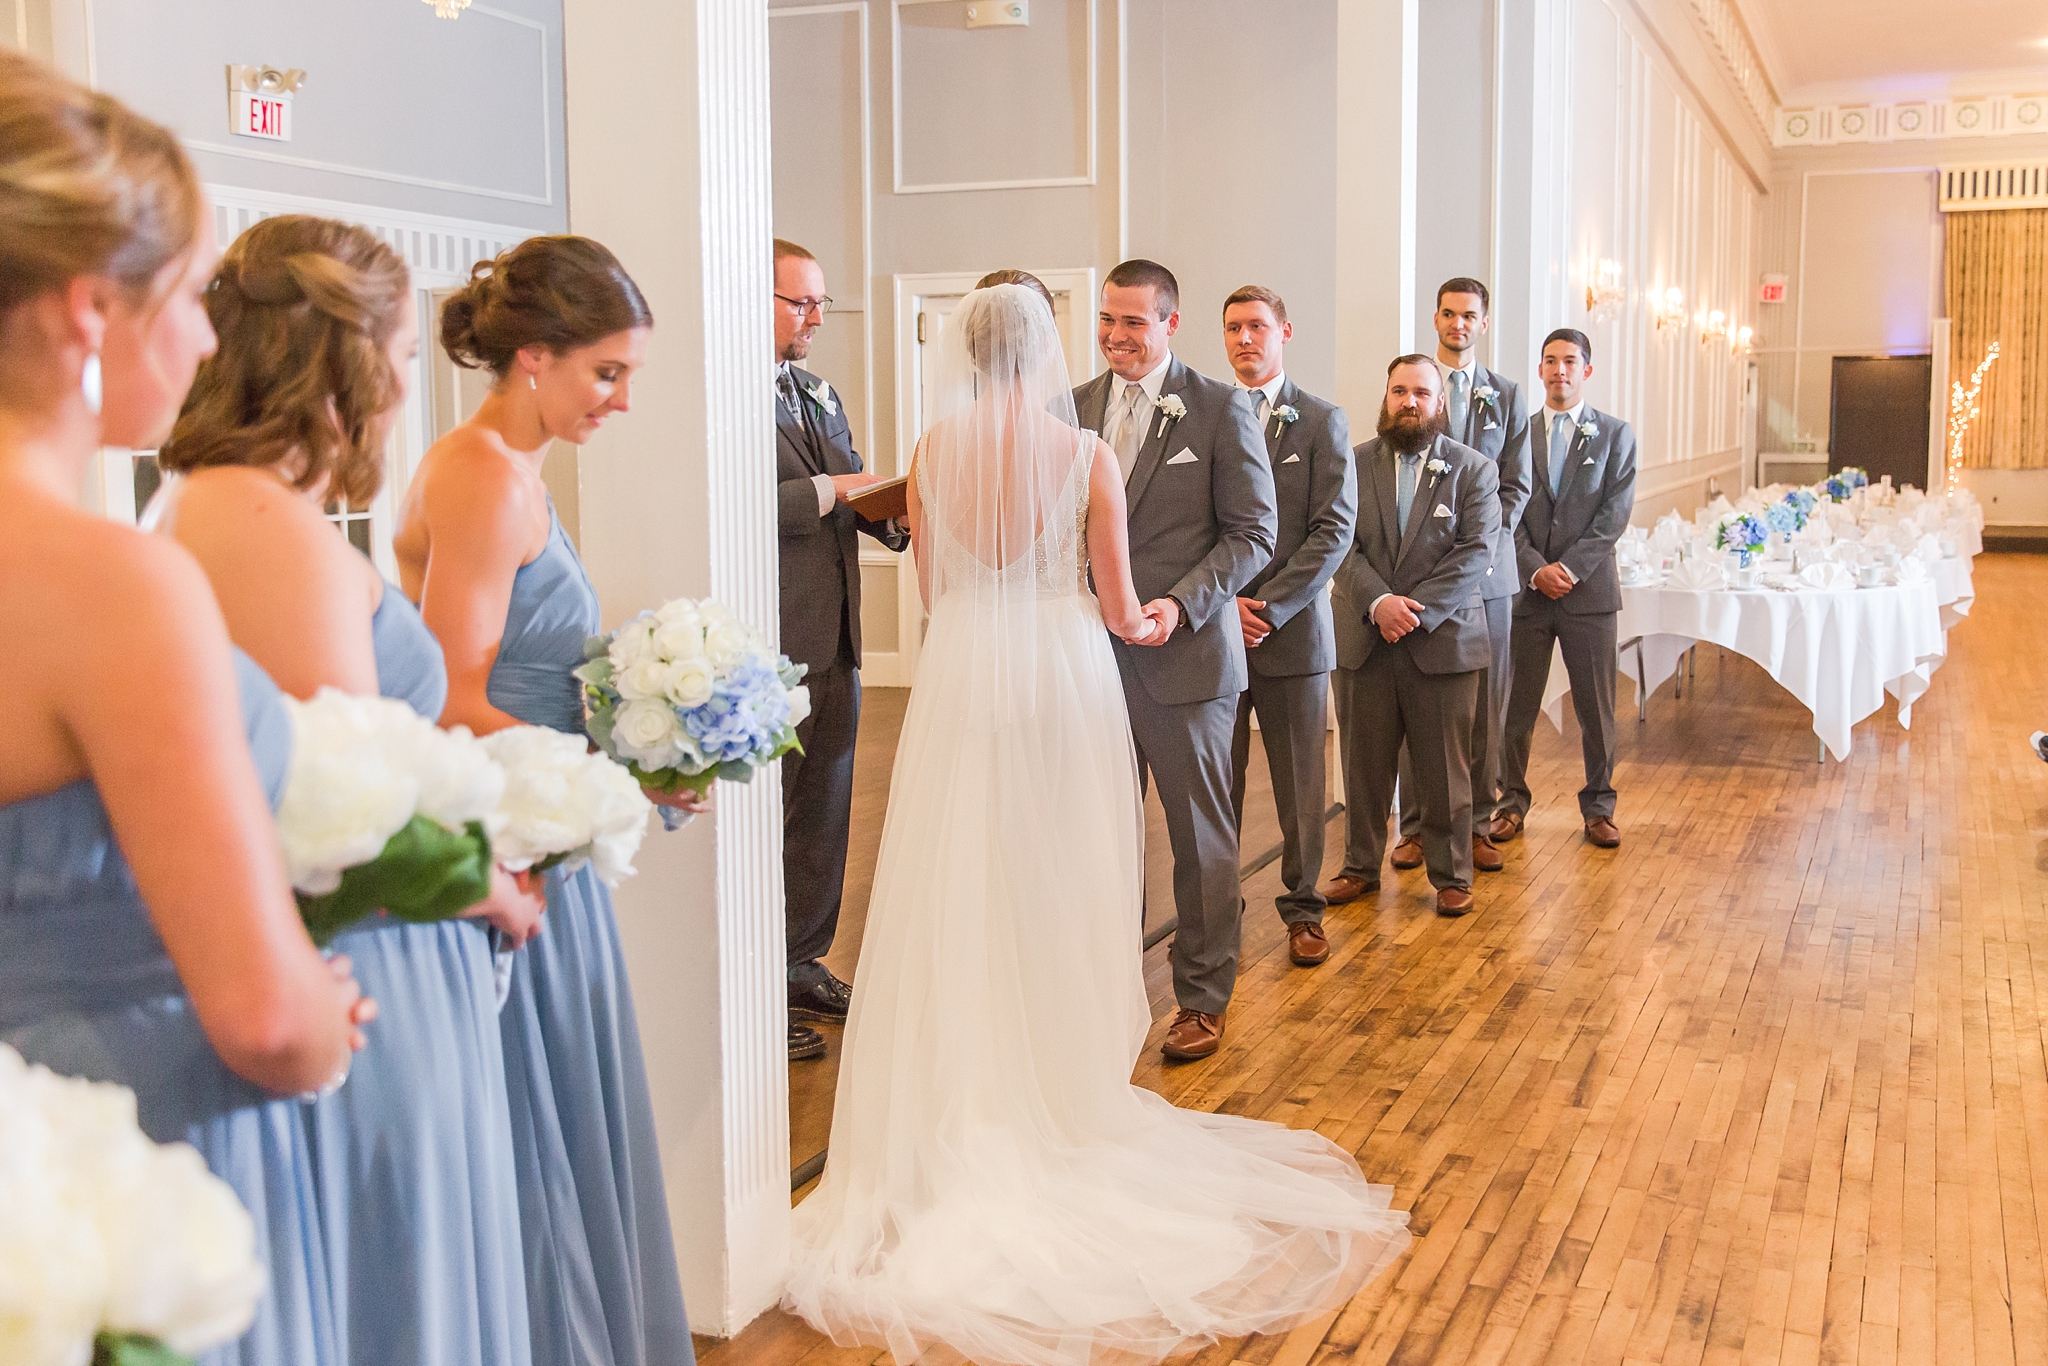 classic-intimate-fun-wedding-photos-at-the-meeting-house-grand-ballroom-in-plymouth-michigan-by-courtney-carolyn-photography_0024.jpg